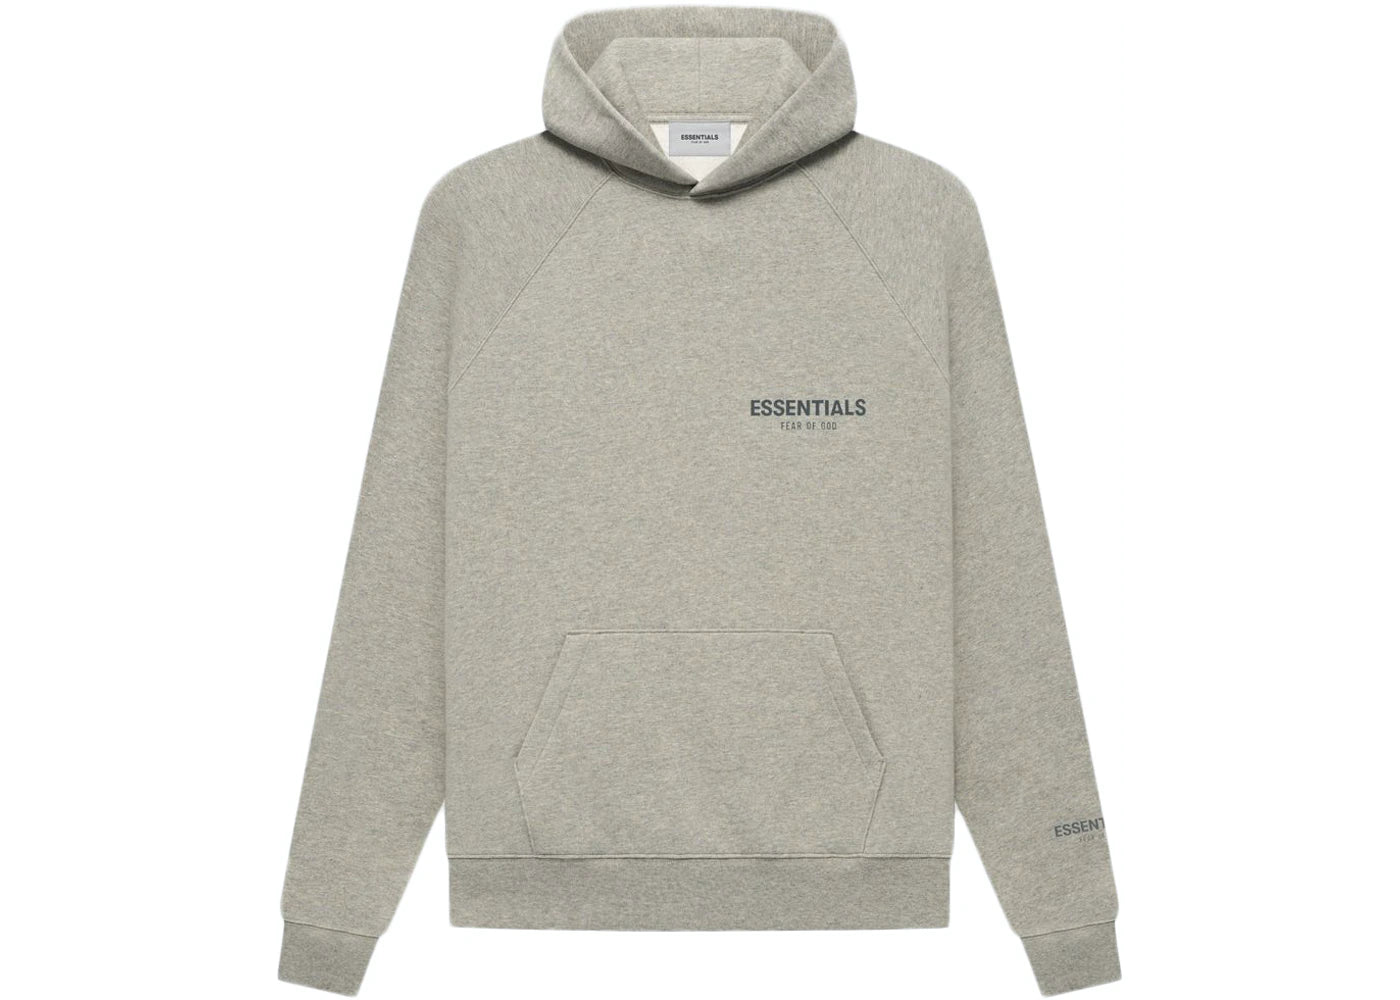 Fear of God Essentials Core Collection Hoodie Dark Heather Oatmeal